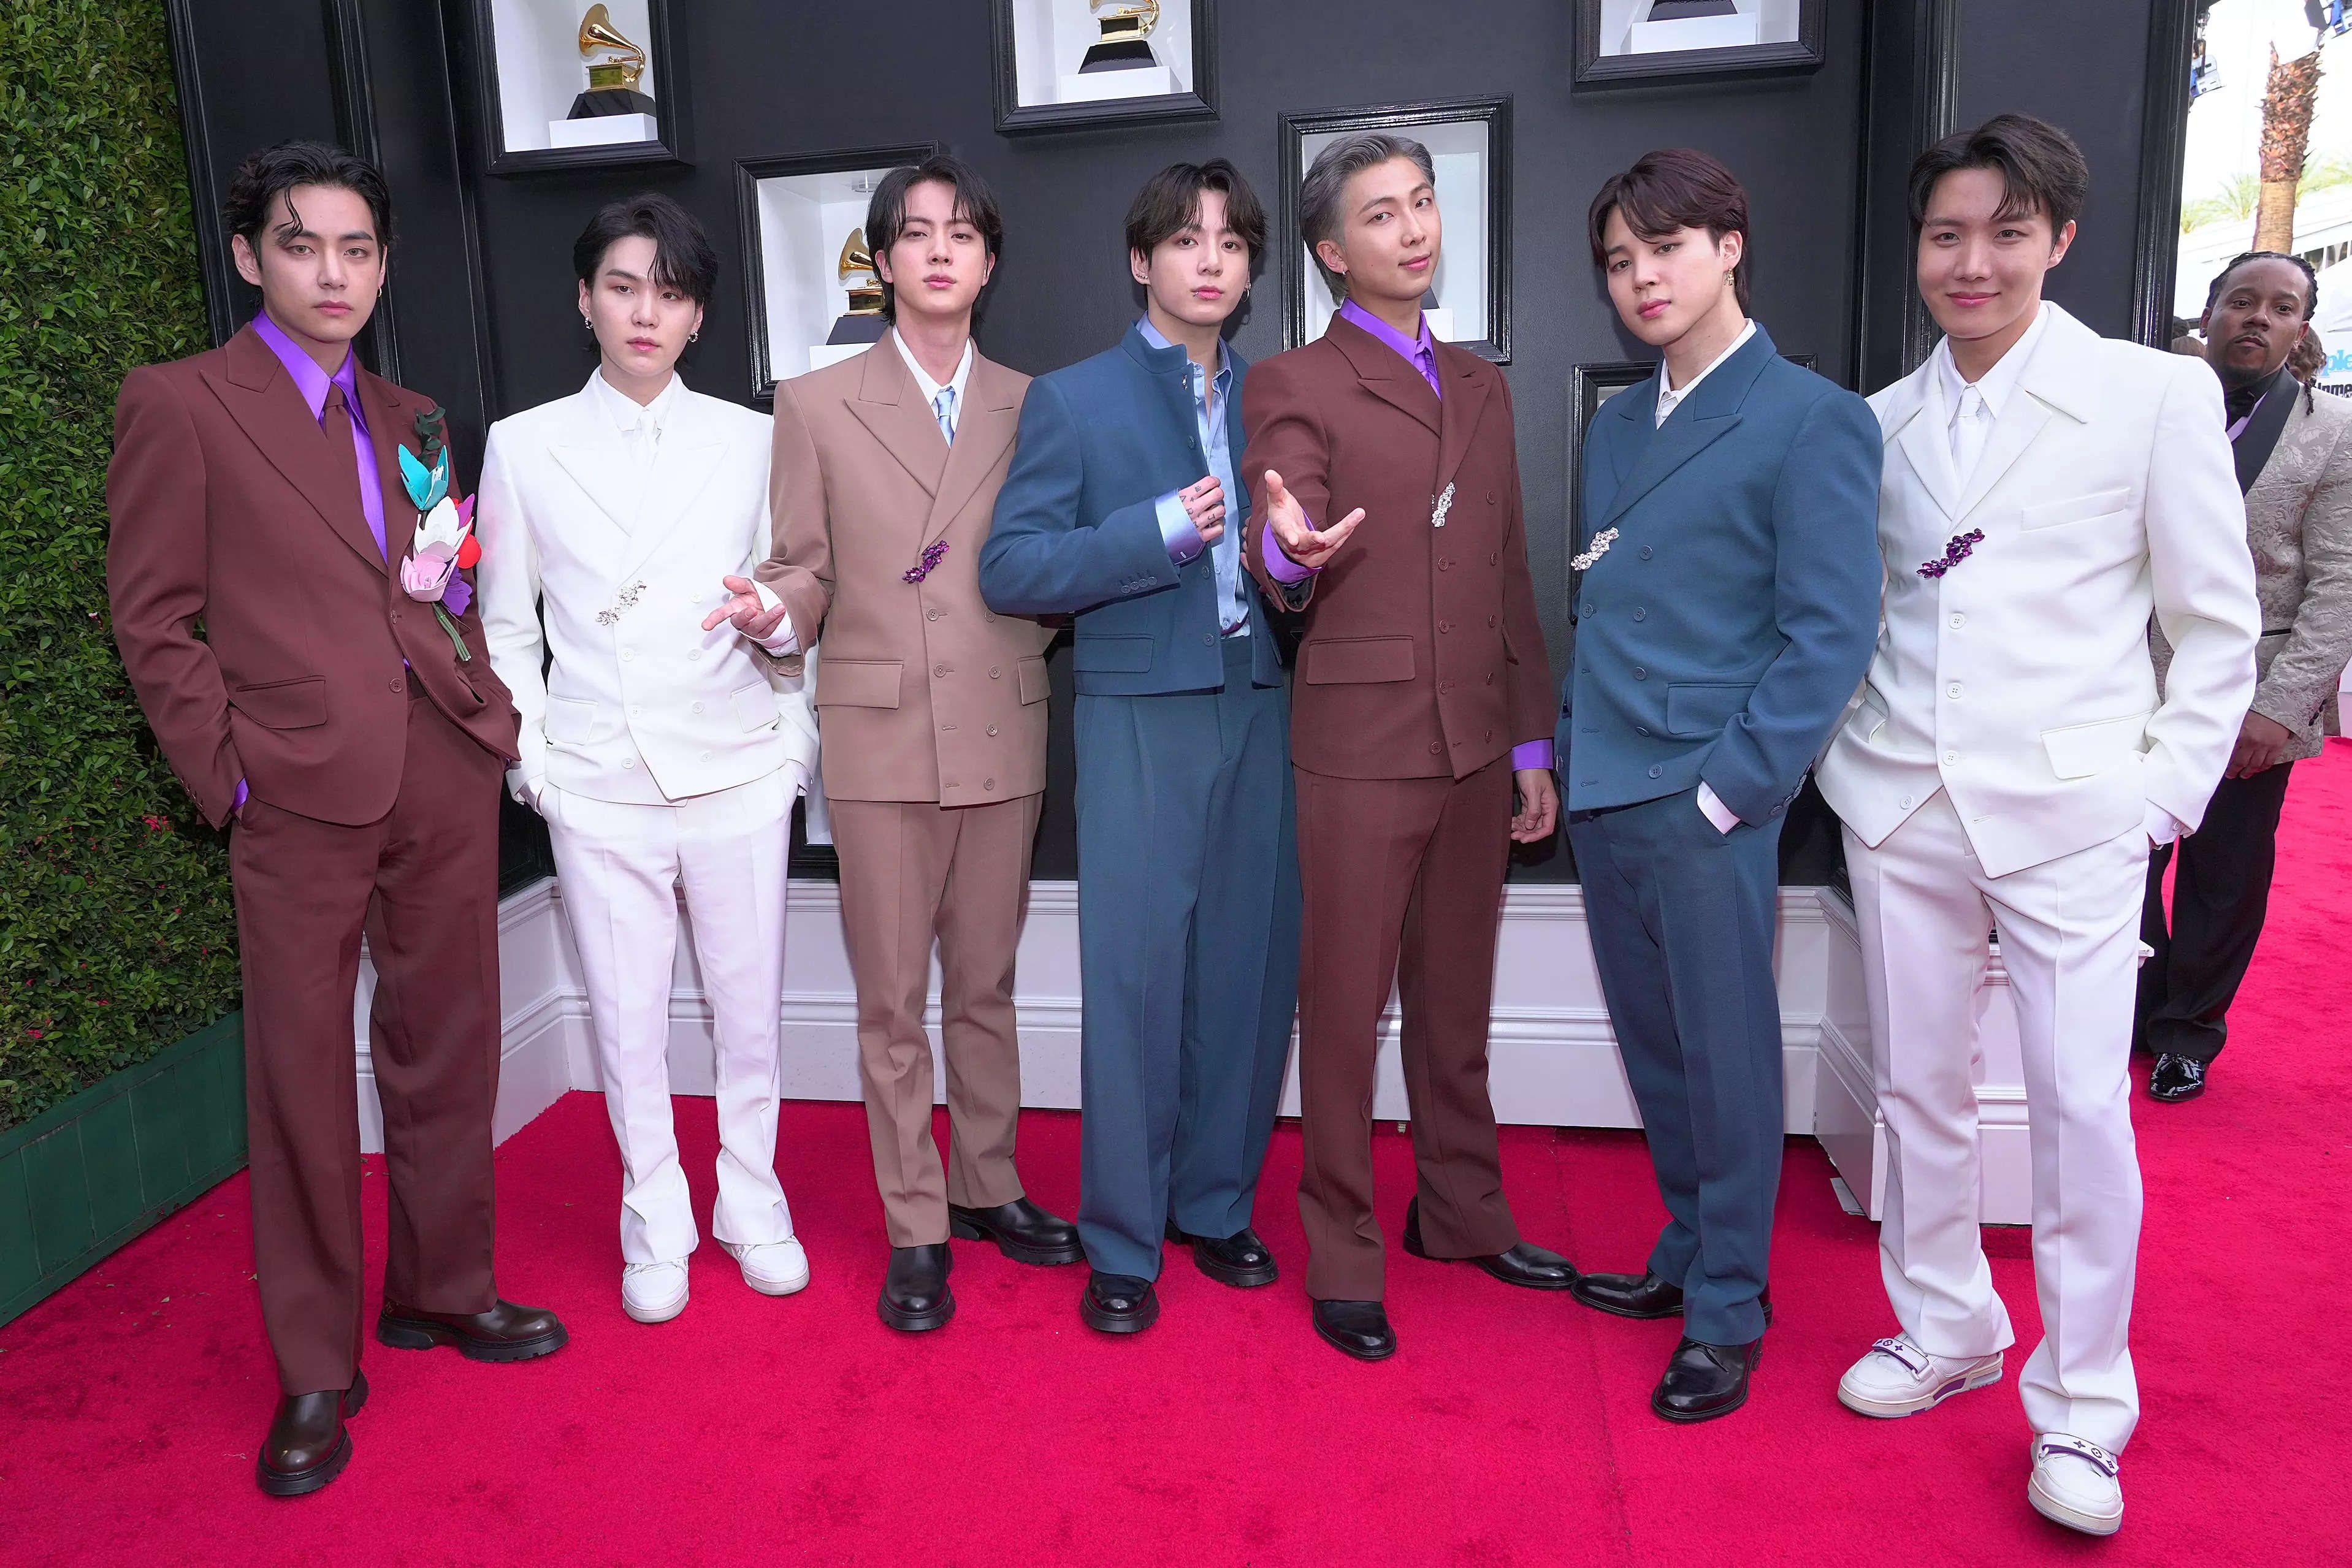 BTS Hiatus Explained: Why the KPop Group BTS Is Taking a Break in 2022